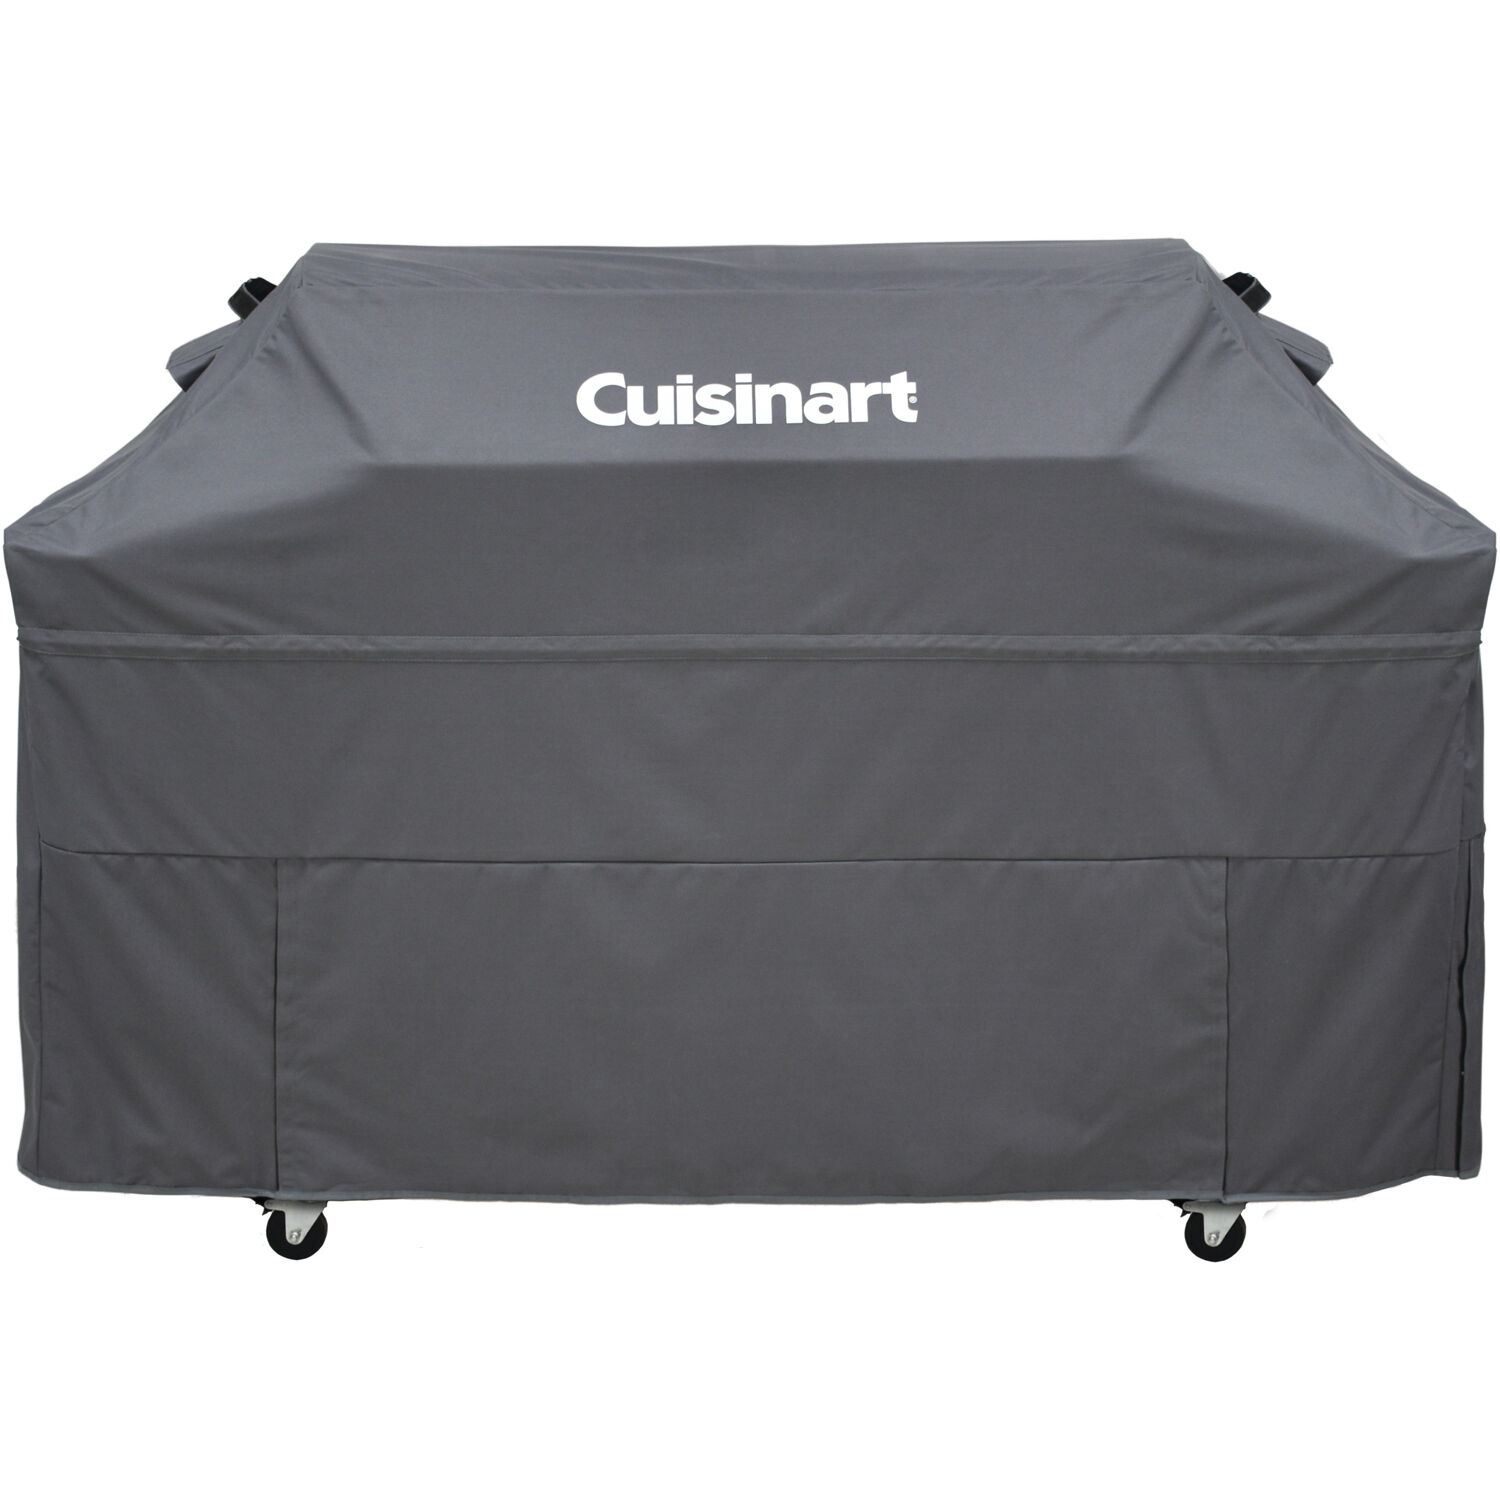 Cuisinart Pellet Grill Cover, Fits Woodcreek and Twin Oaks Pellet Grills - image 1 of 6